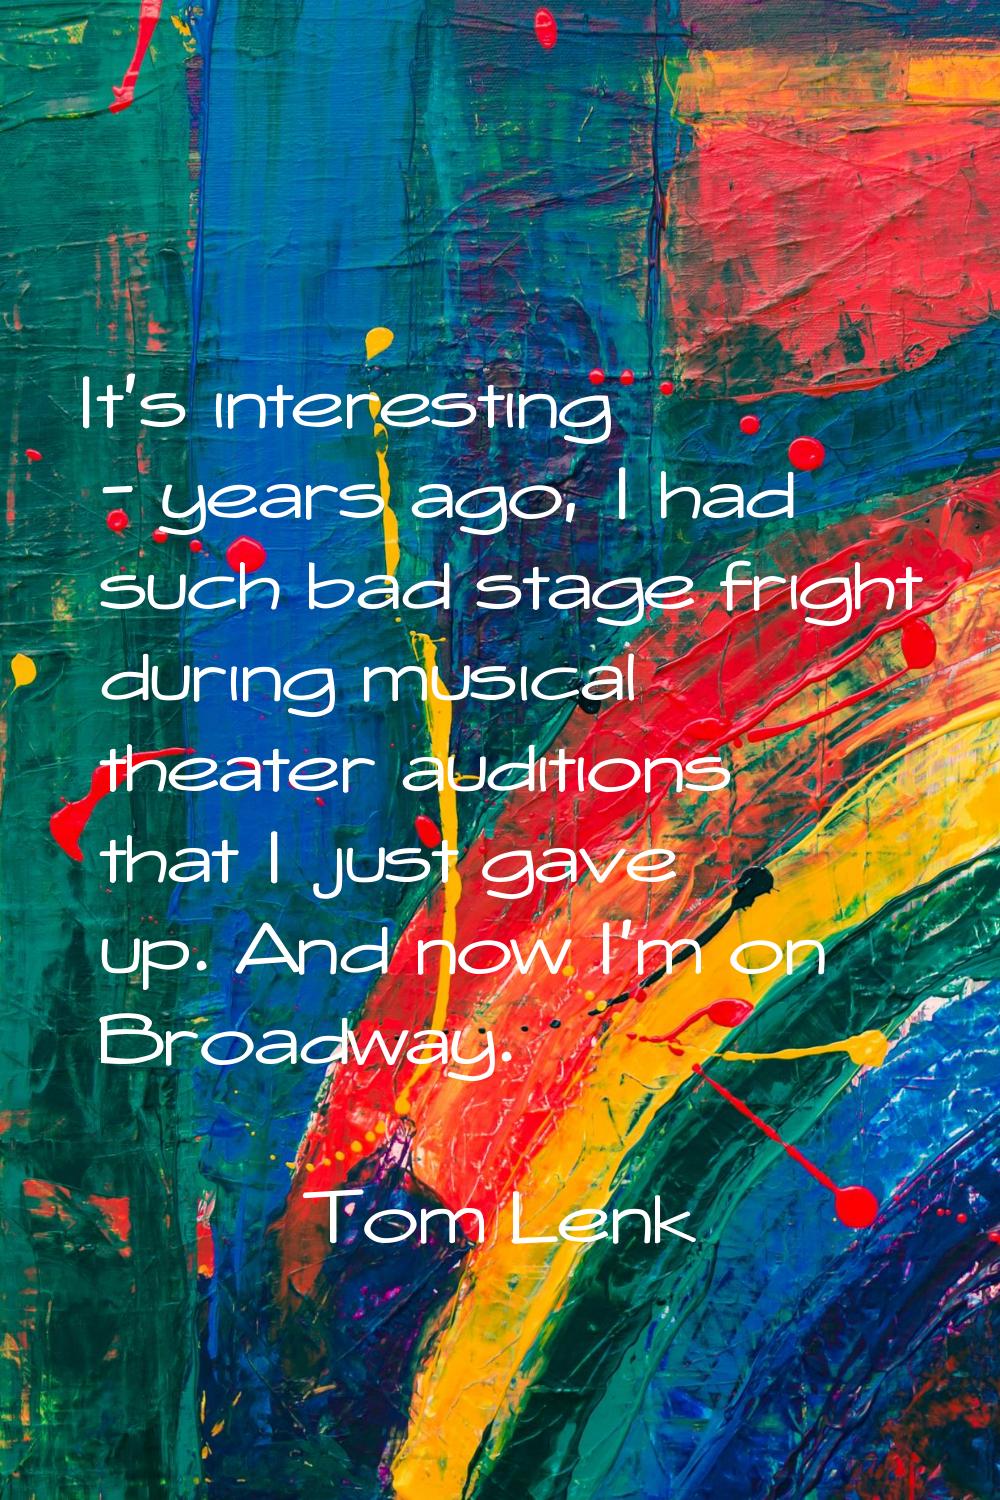 It's interesting - years ago, I had such bad stage fright during musical theater auditions that I j